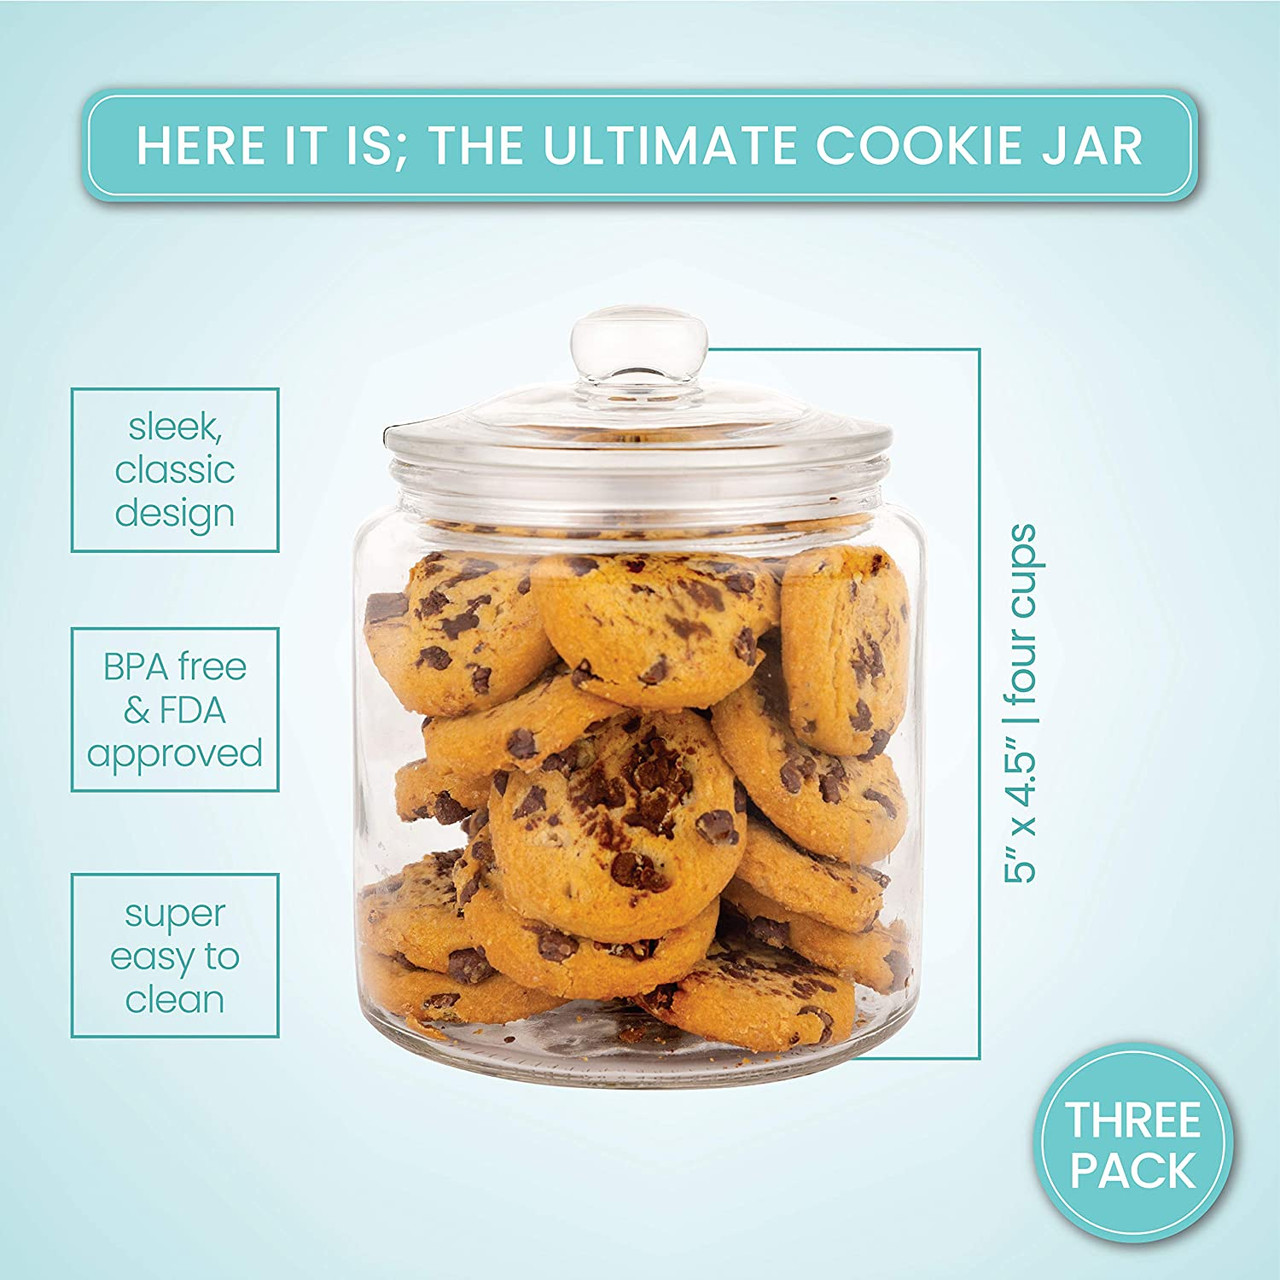 Glass Jar with Lid Clear Airtight Glass Storage Cookie Jar for